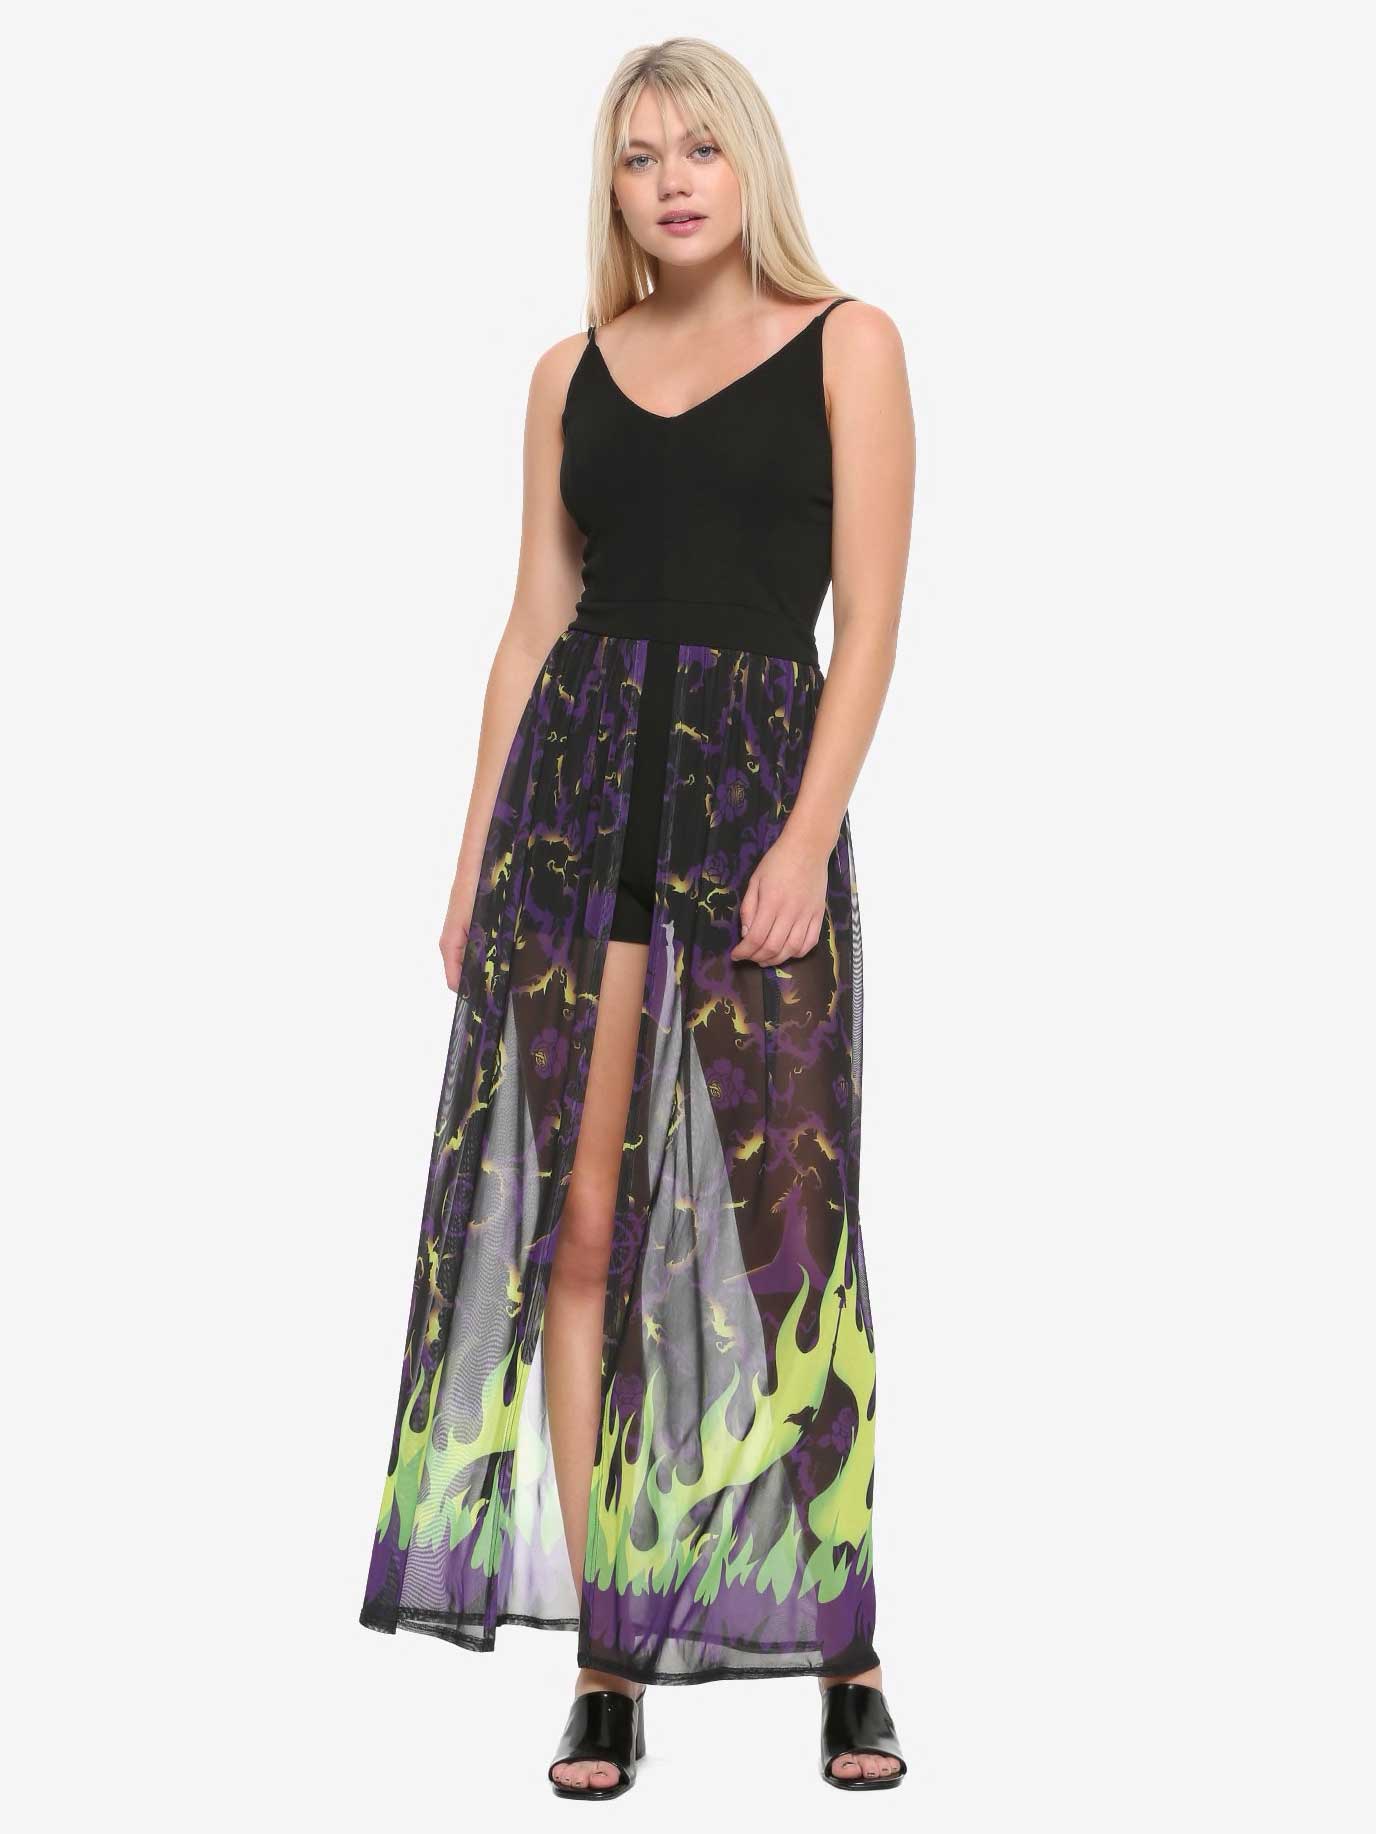 long sheer skirt with purple and green flames